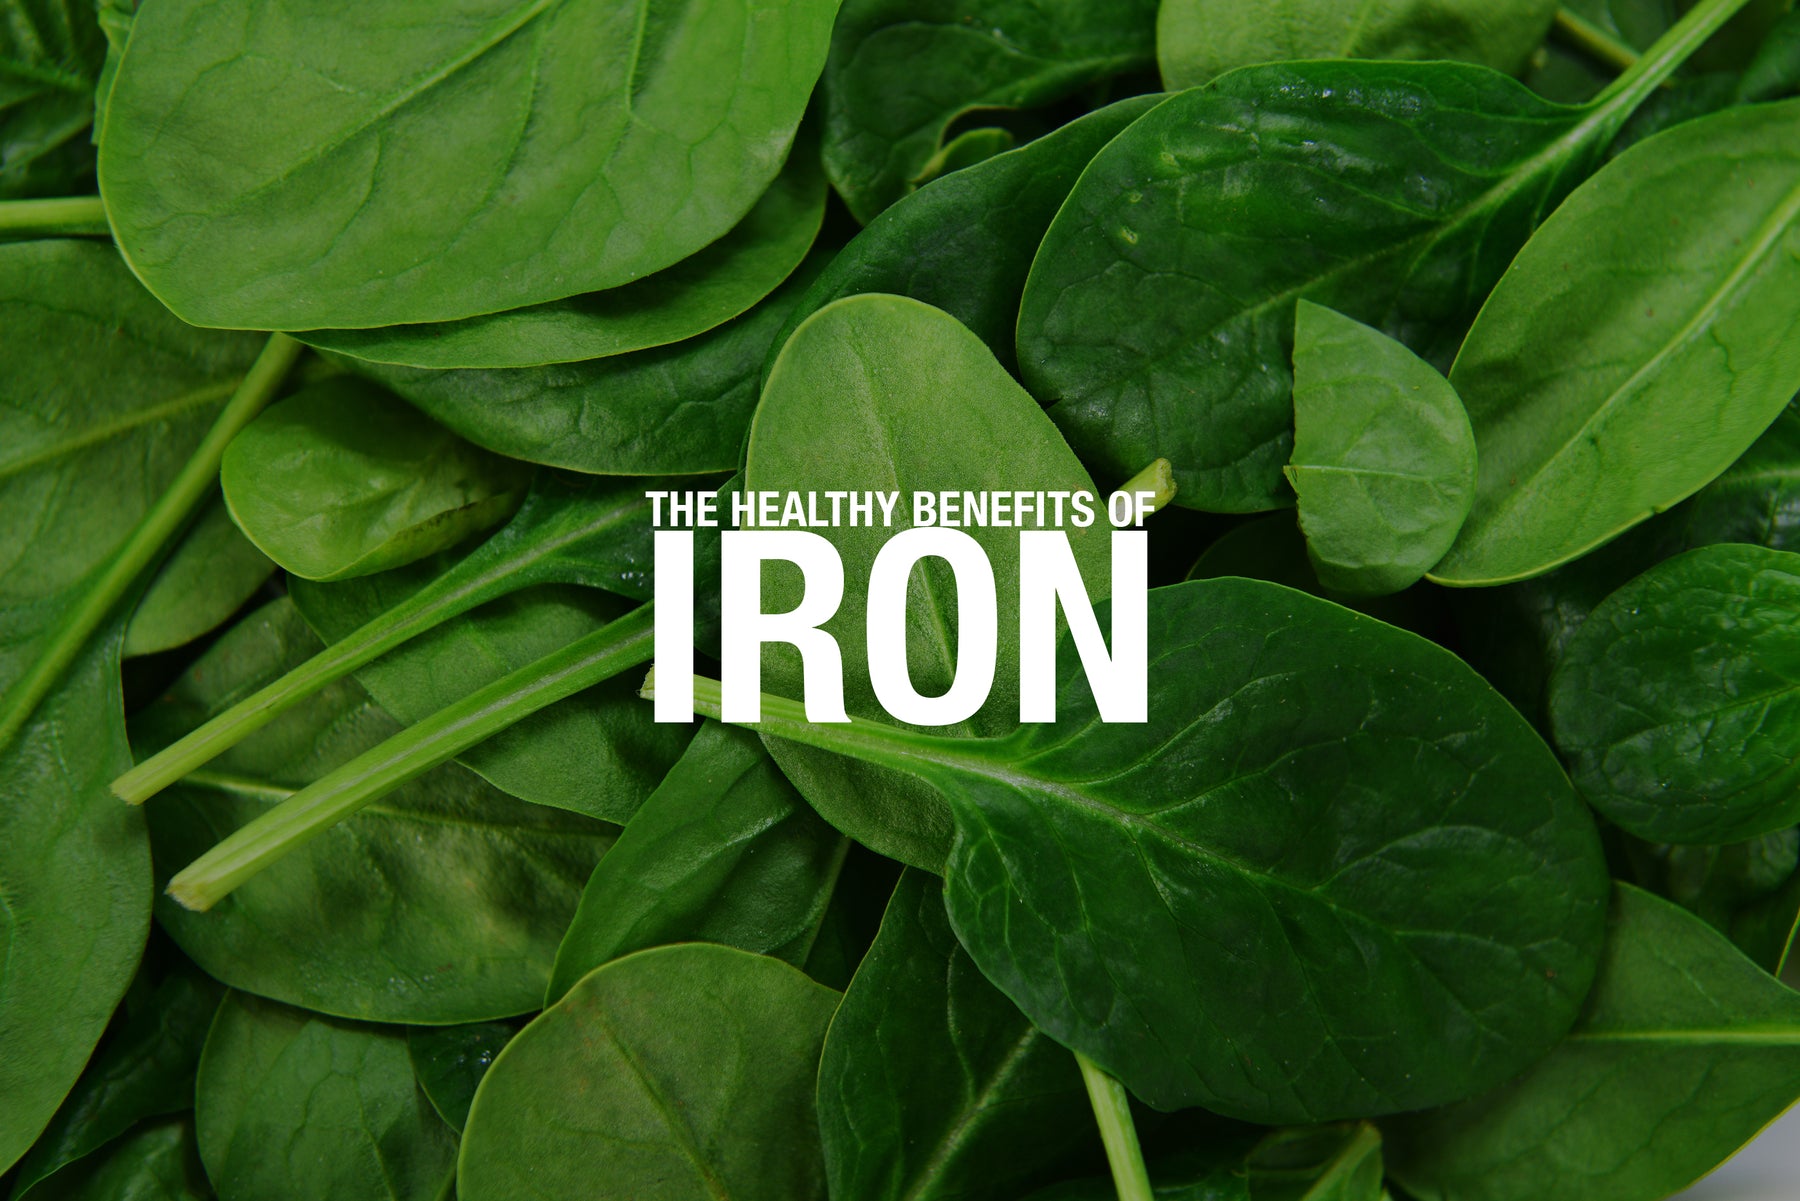 The Healthy Benefits of Iron